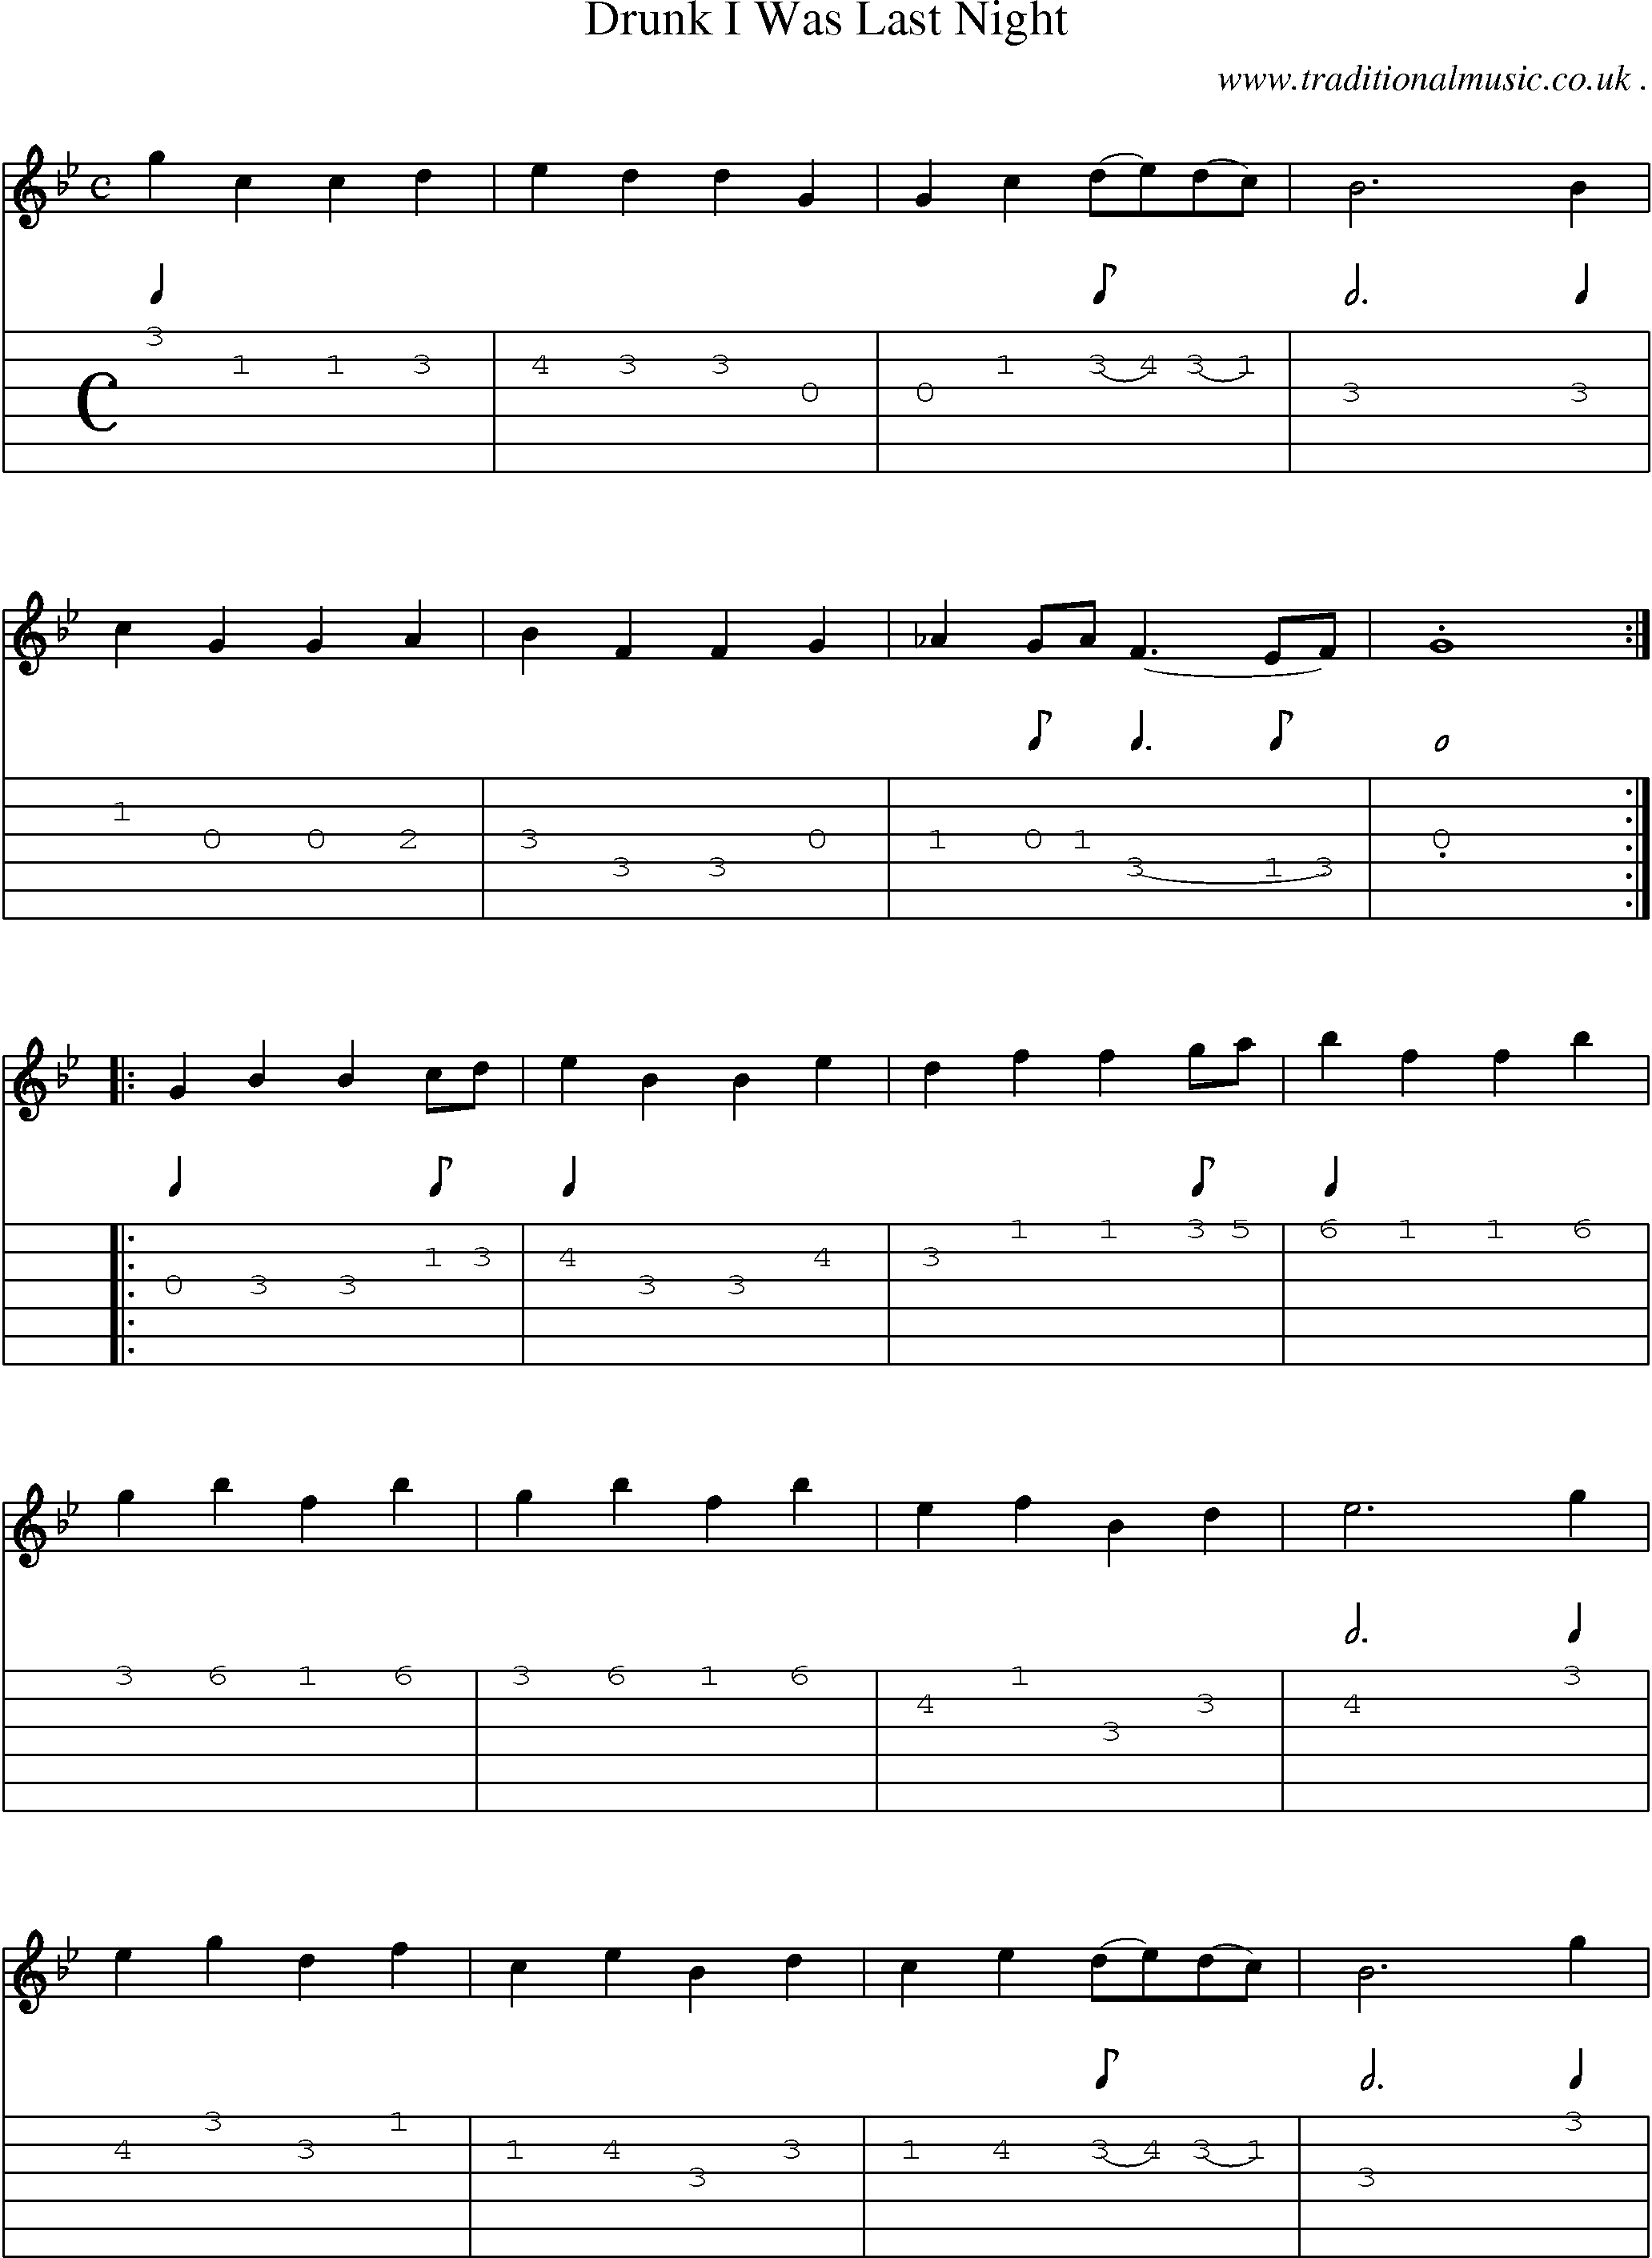 Sheet-Music and Guitar Tabs for Drunk I Was Last Night